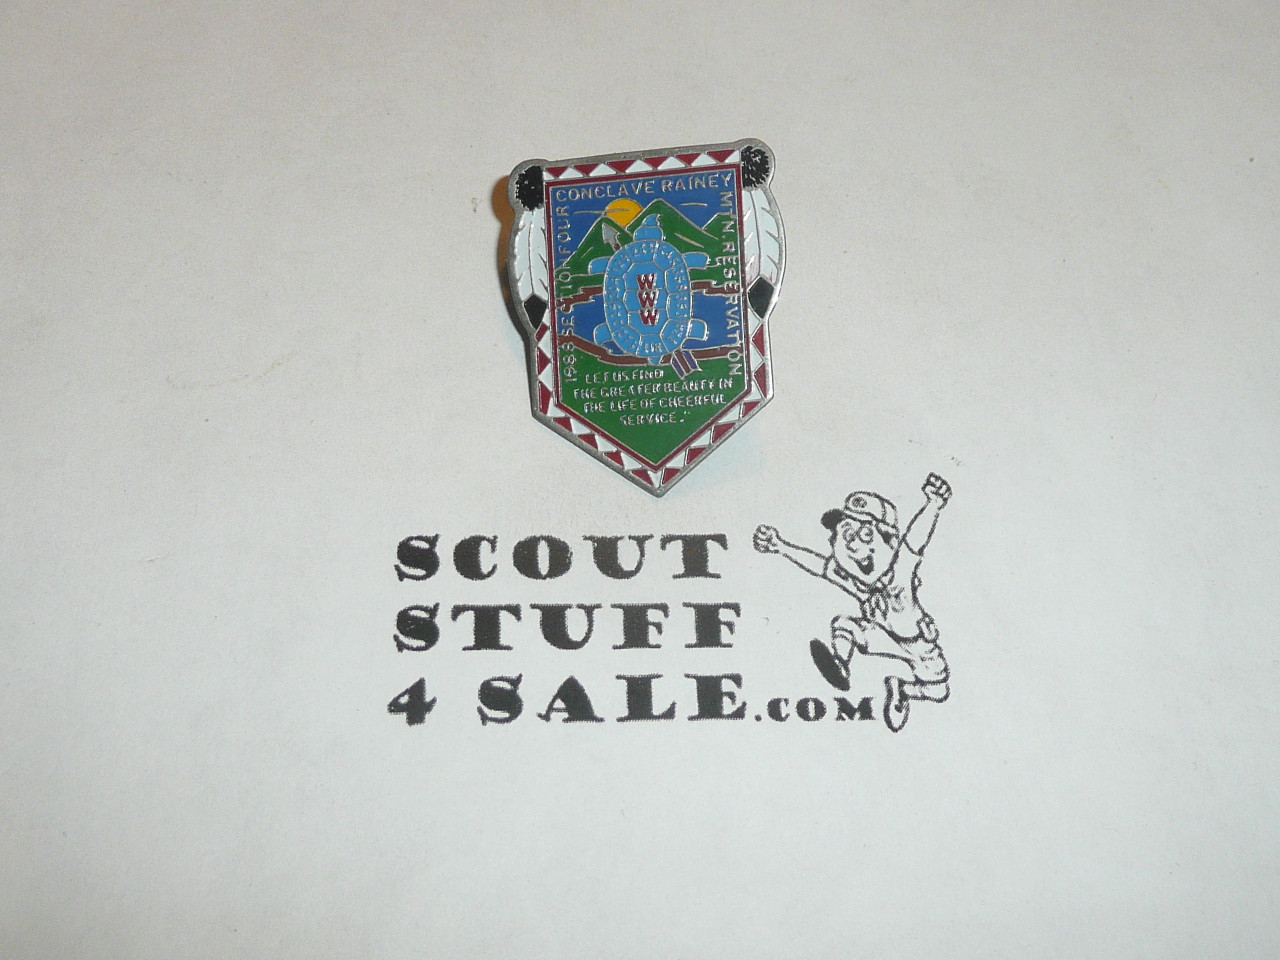 1988 O.A. Section se-4 Conclave Pin - Scout